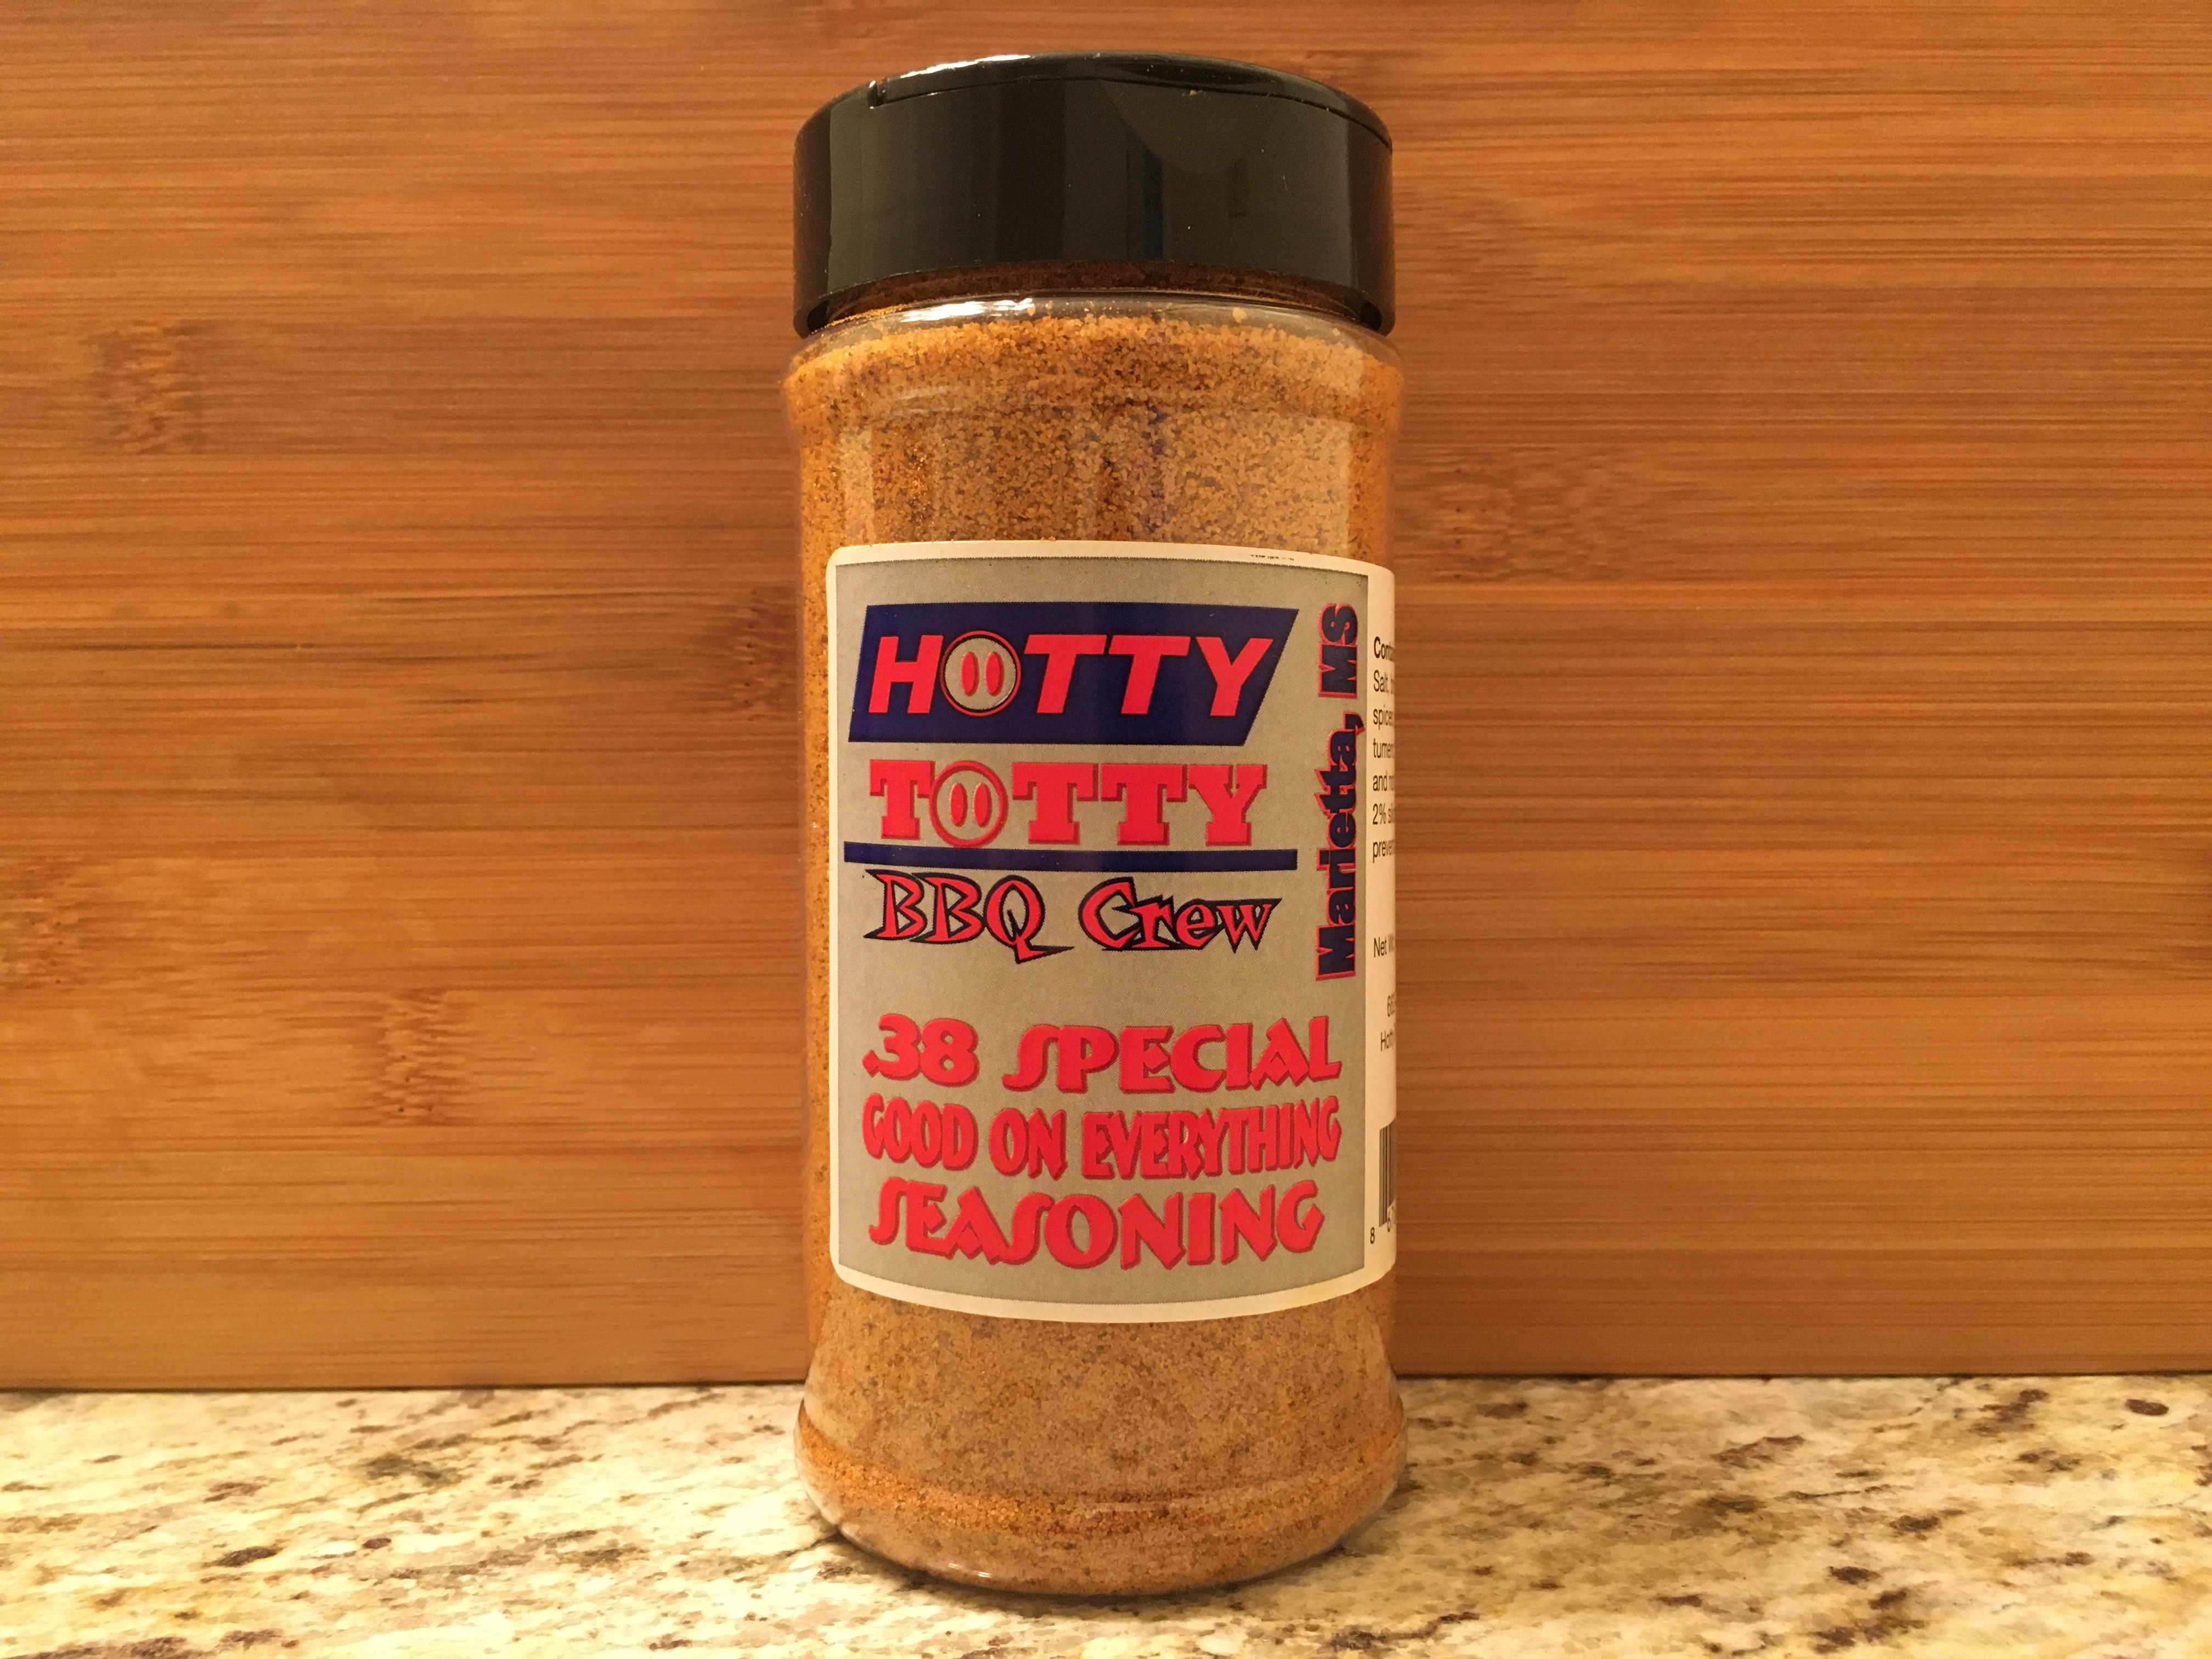 Hotty Totty BBQ Crew - .38 Special Good on Everything Seasoning #SGOES